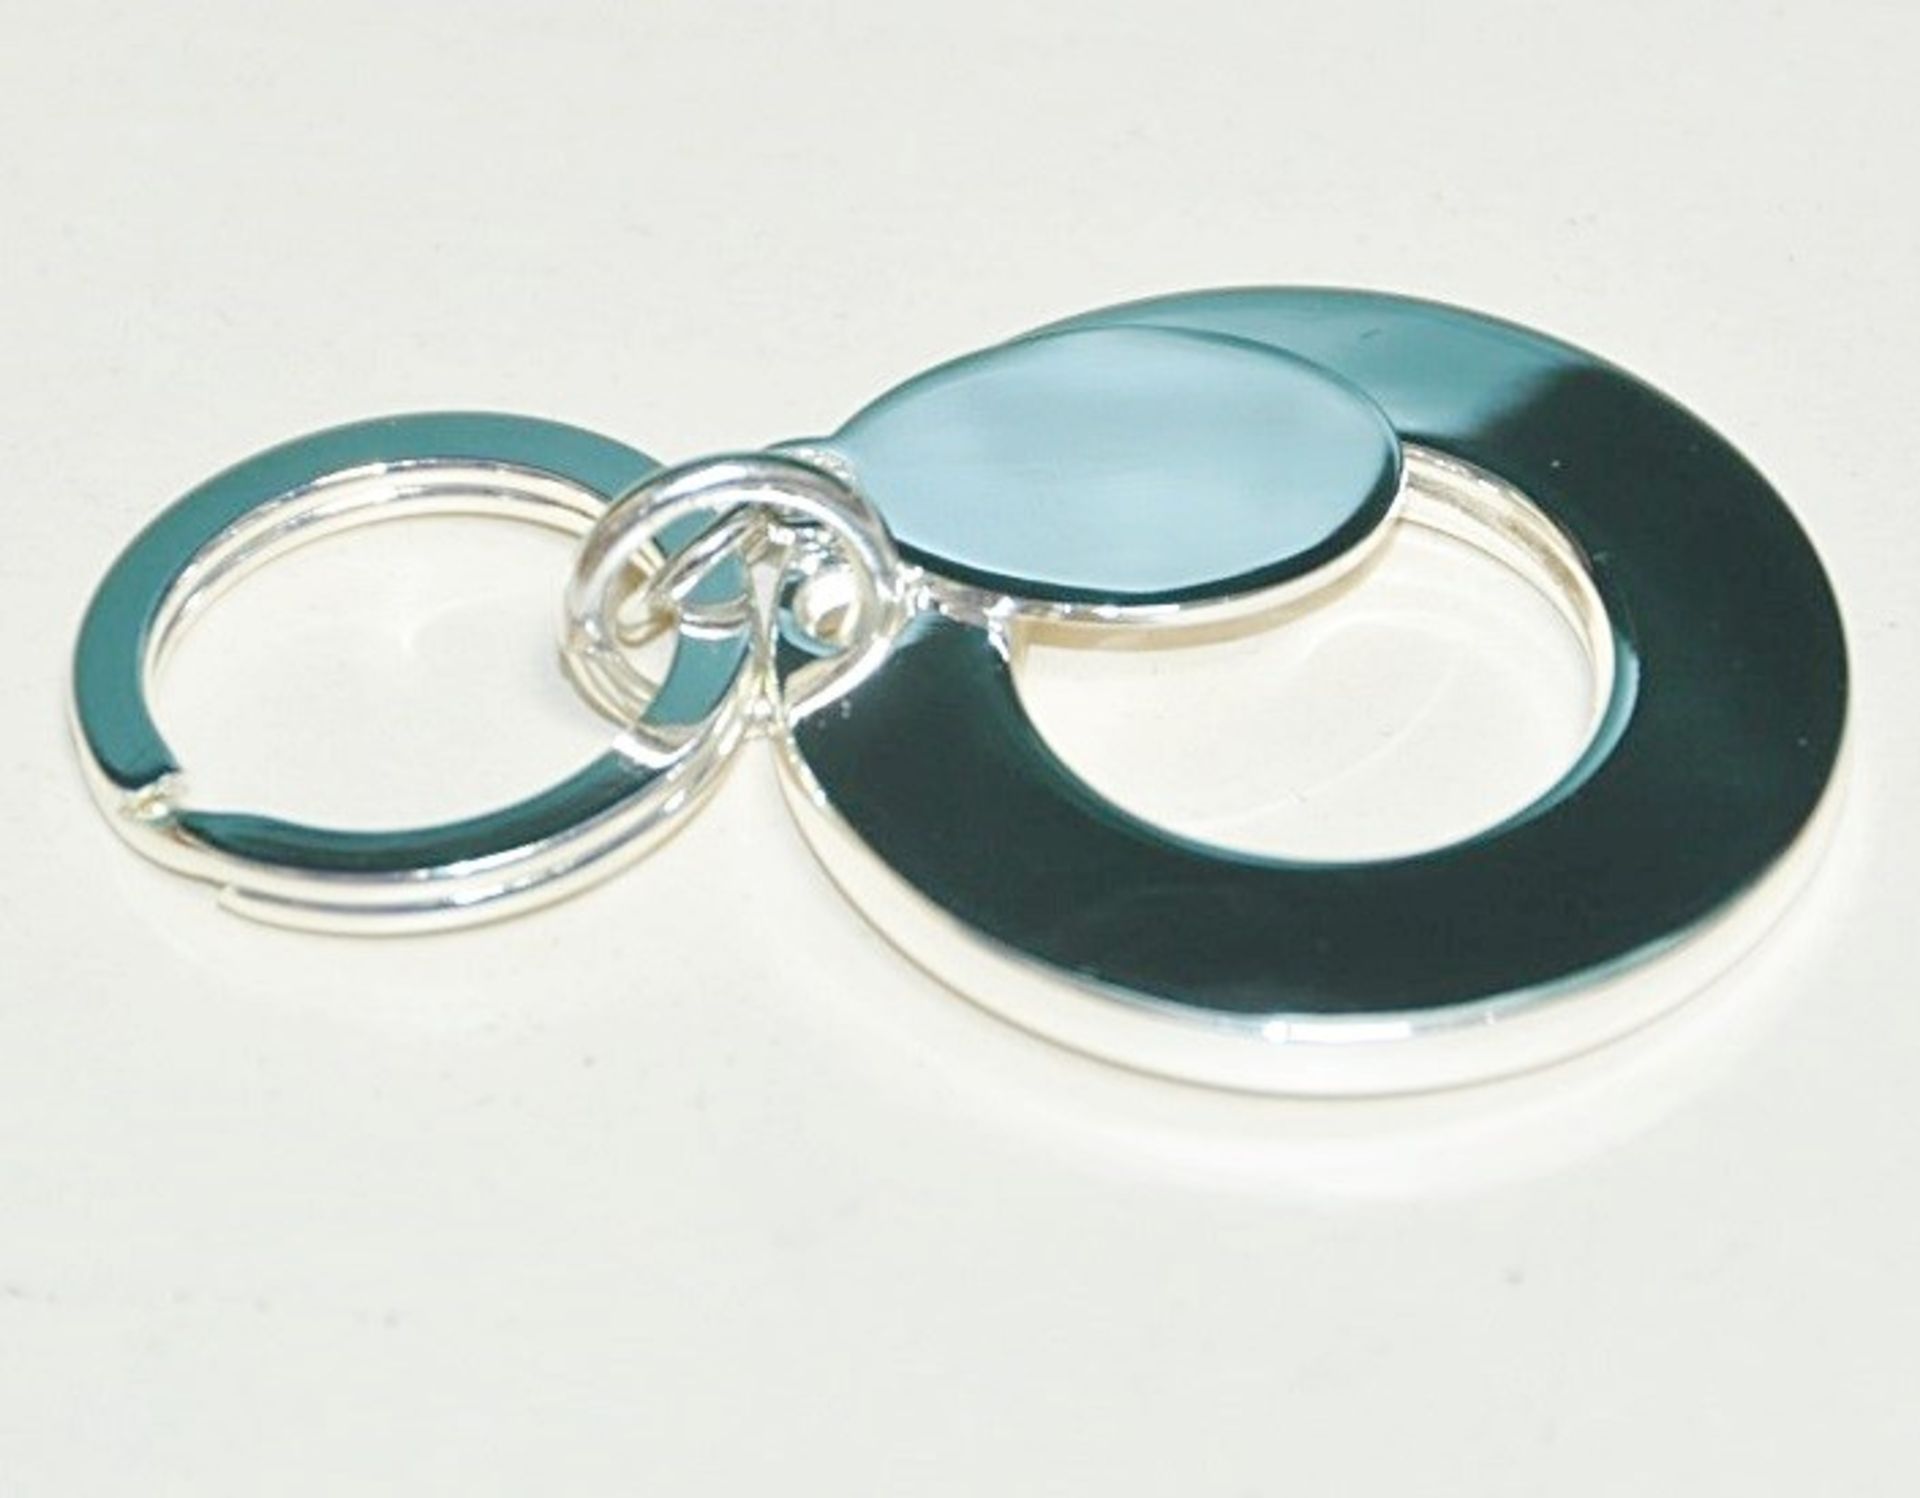 50 x Silver Plated Key Rings By ICE London - Design: SOLAR - MADE WITH "SWAROVSKI¨ ELEMENTS - Luxury - Image 2 of 4